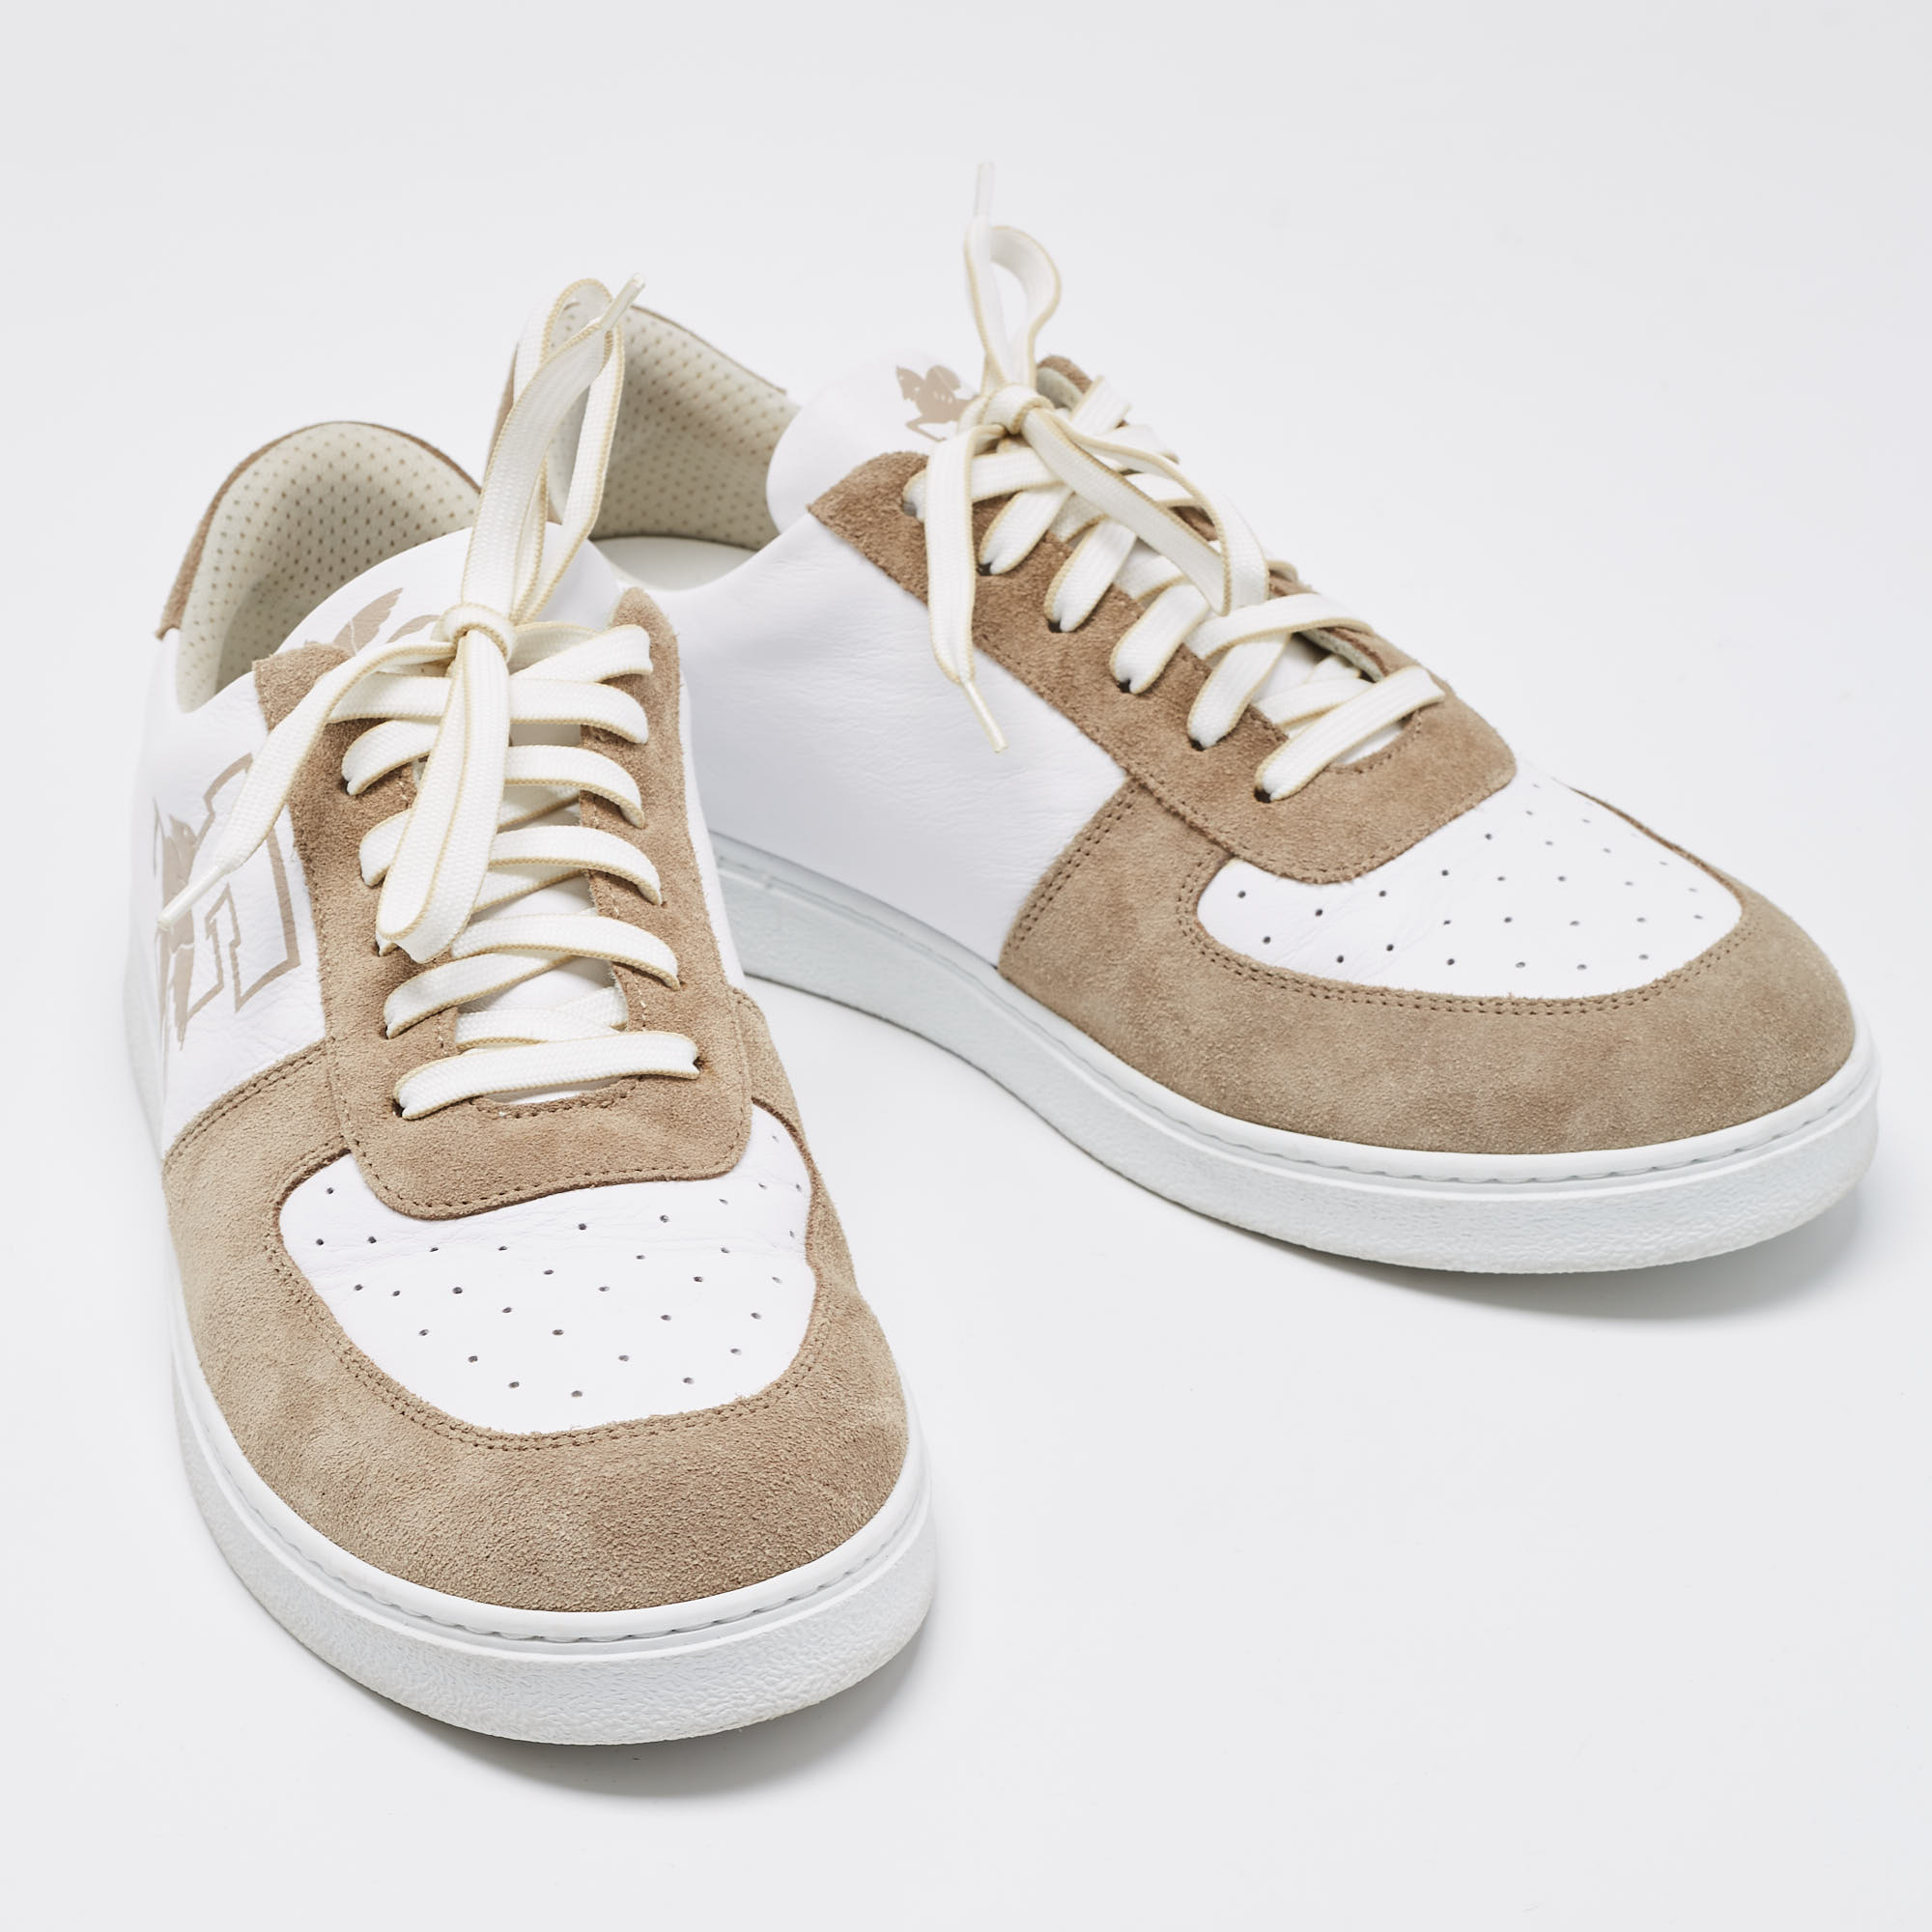 Etro White/Beige Leather And Suede Low Top Sneakers Size 44